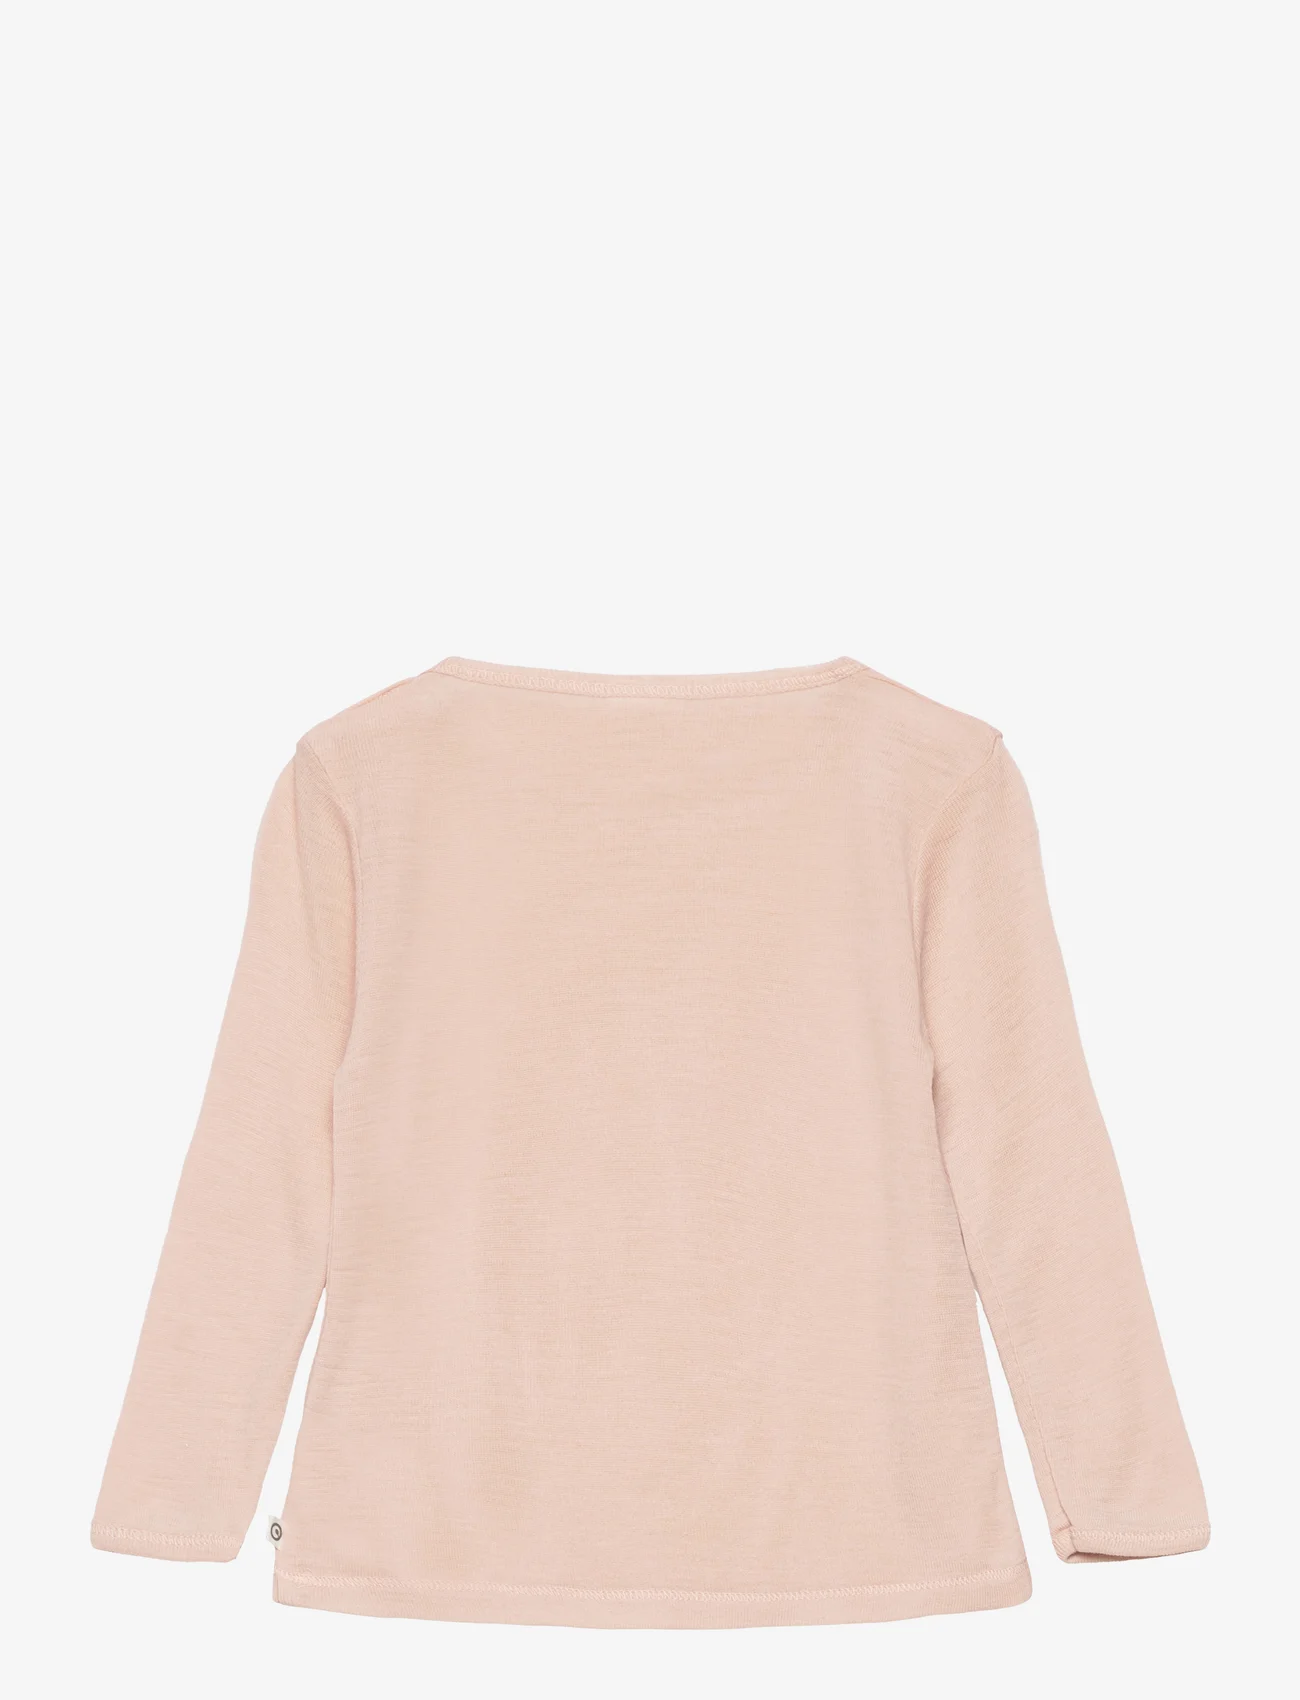 Müsli by Green Cotton - Woolly l/s T baby - alhaisimmat hinnat - spa rose - 1